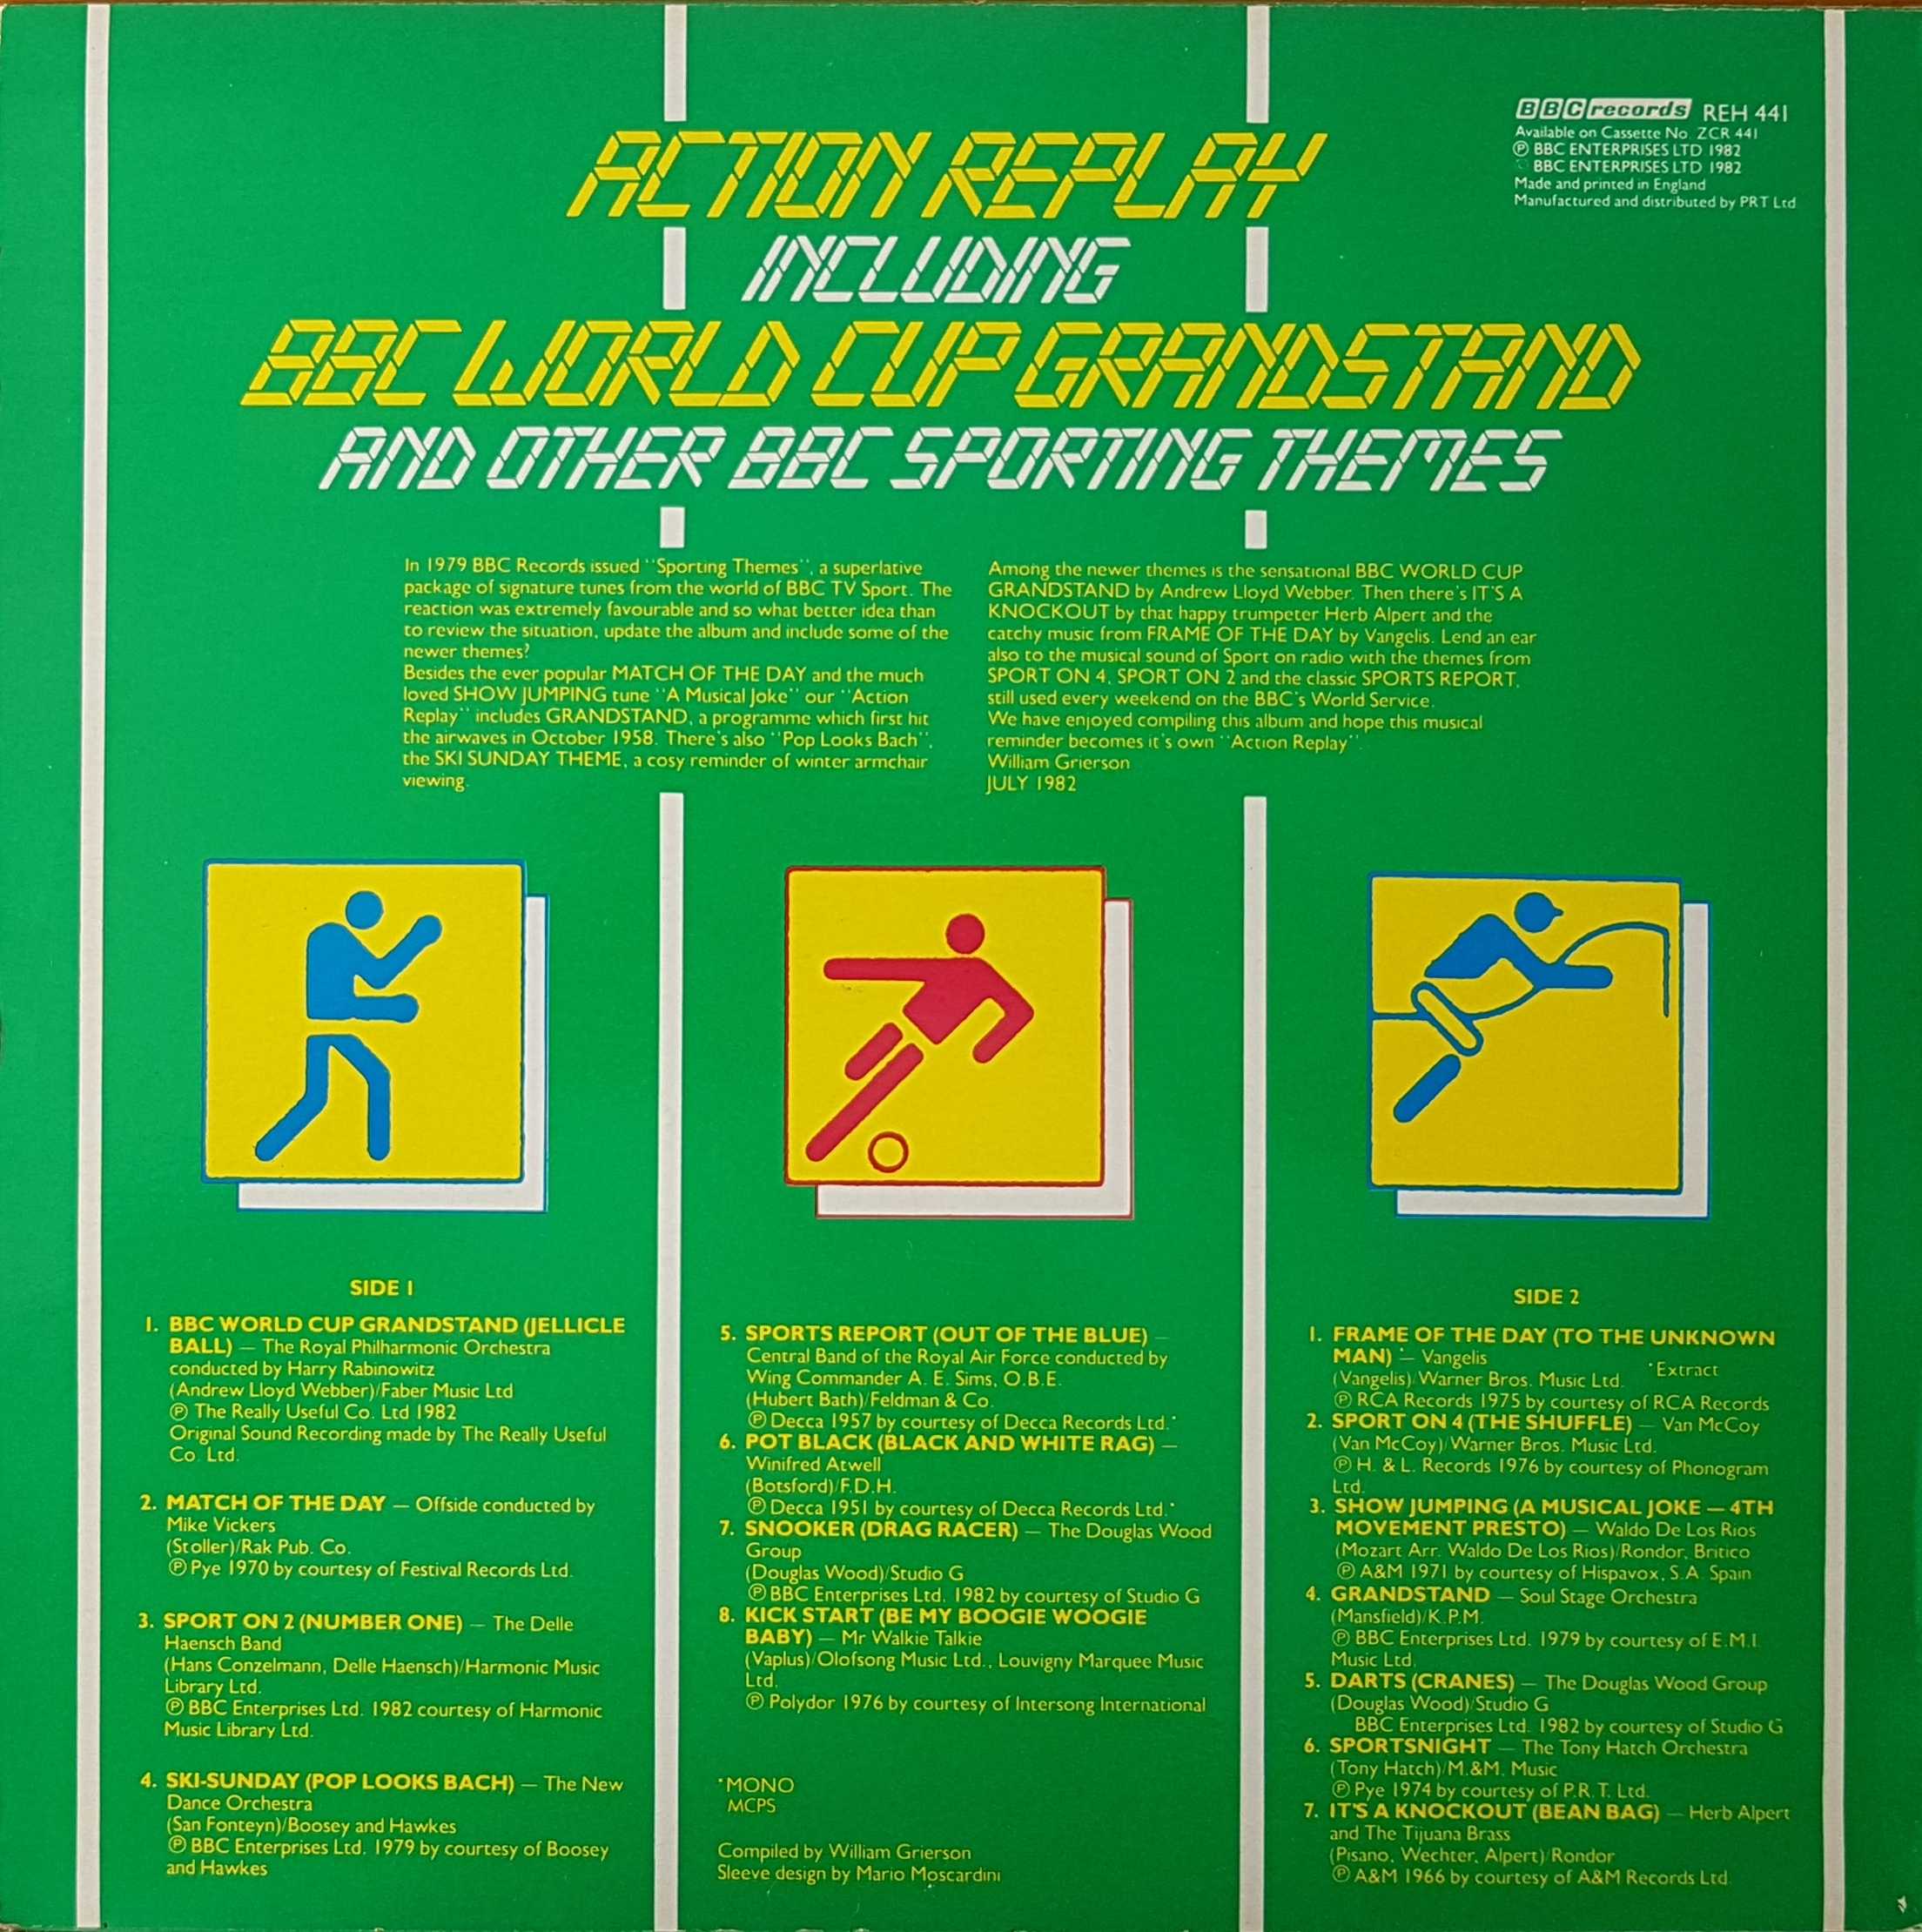 Picture of REH 441 Action replay - BBC sporting themes by artist Various from the BBC records and Tapes library